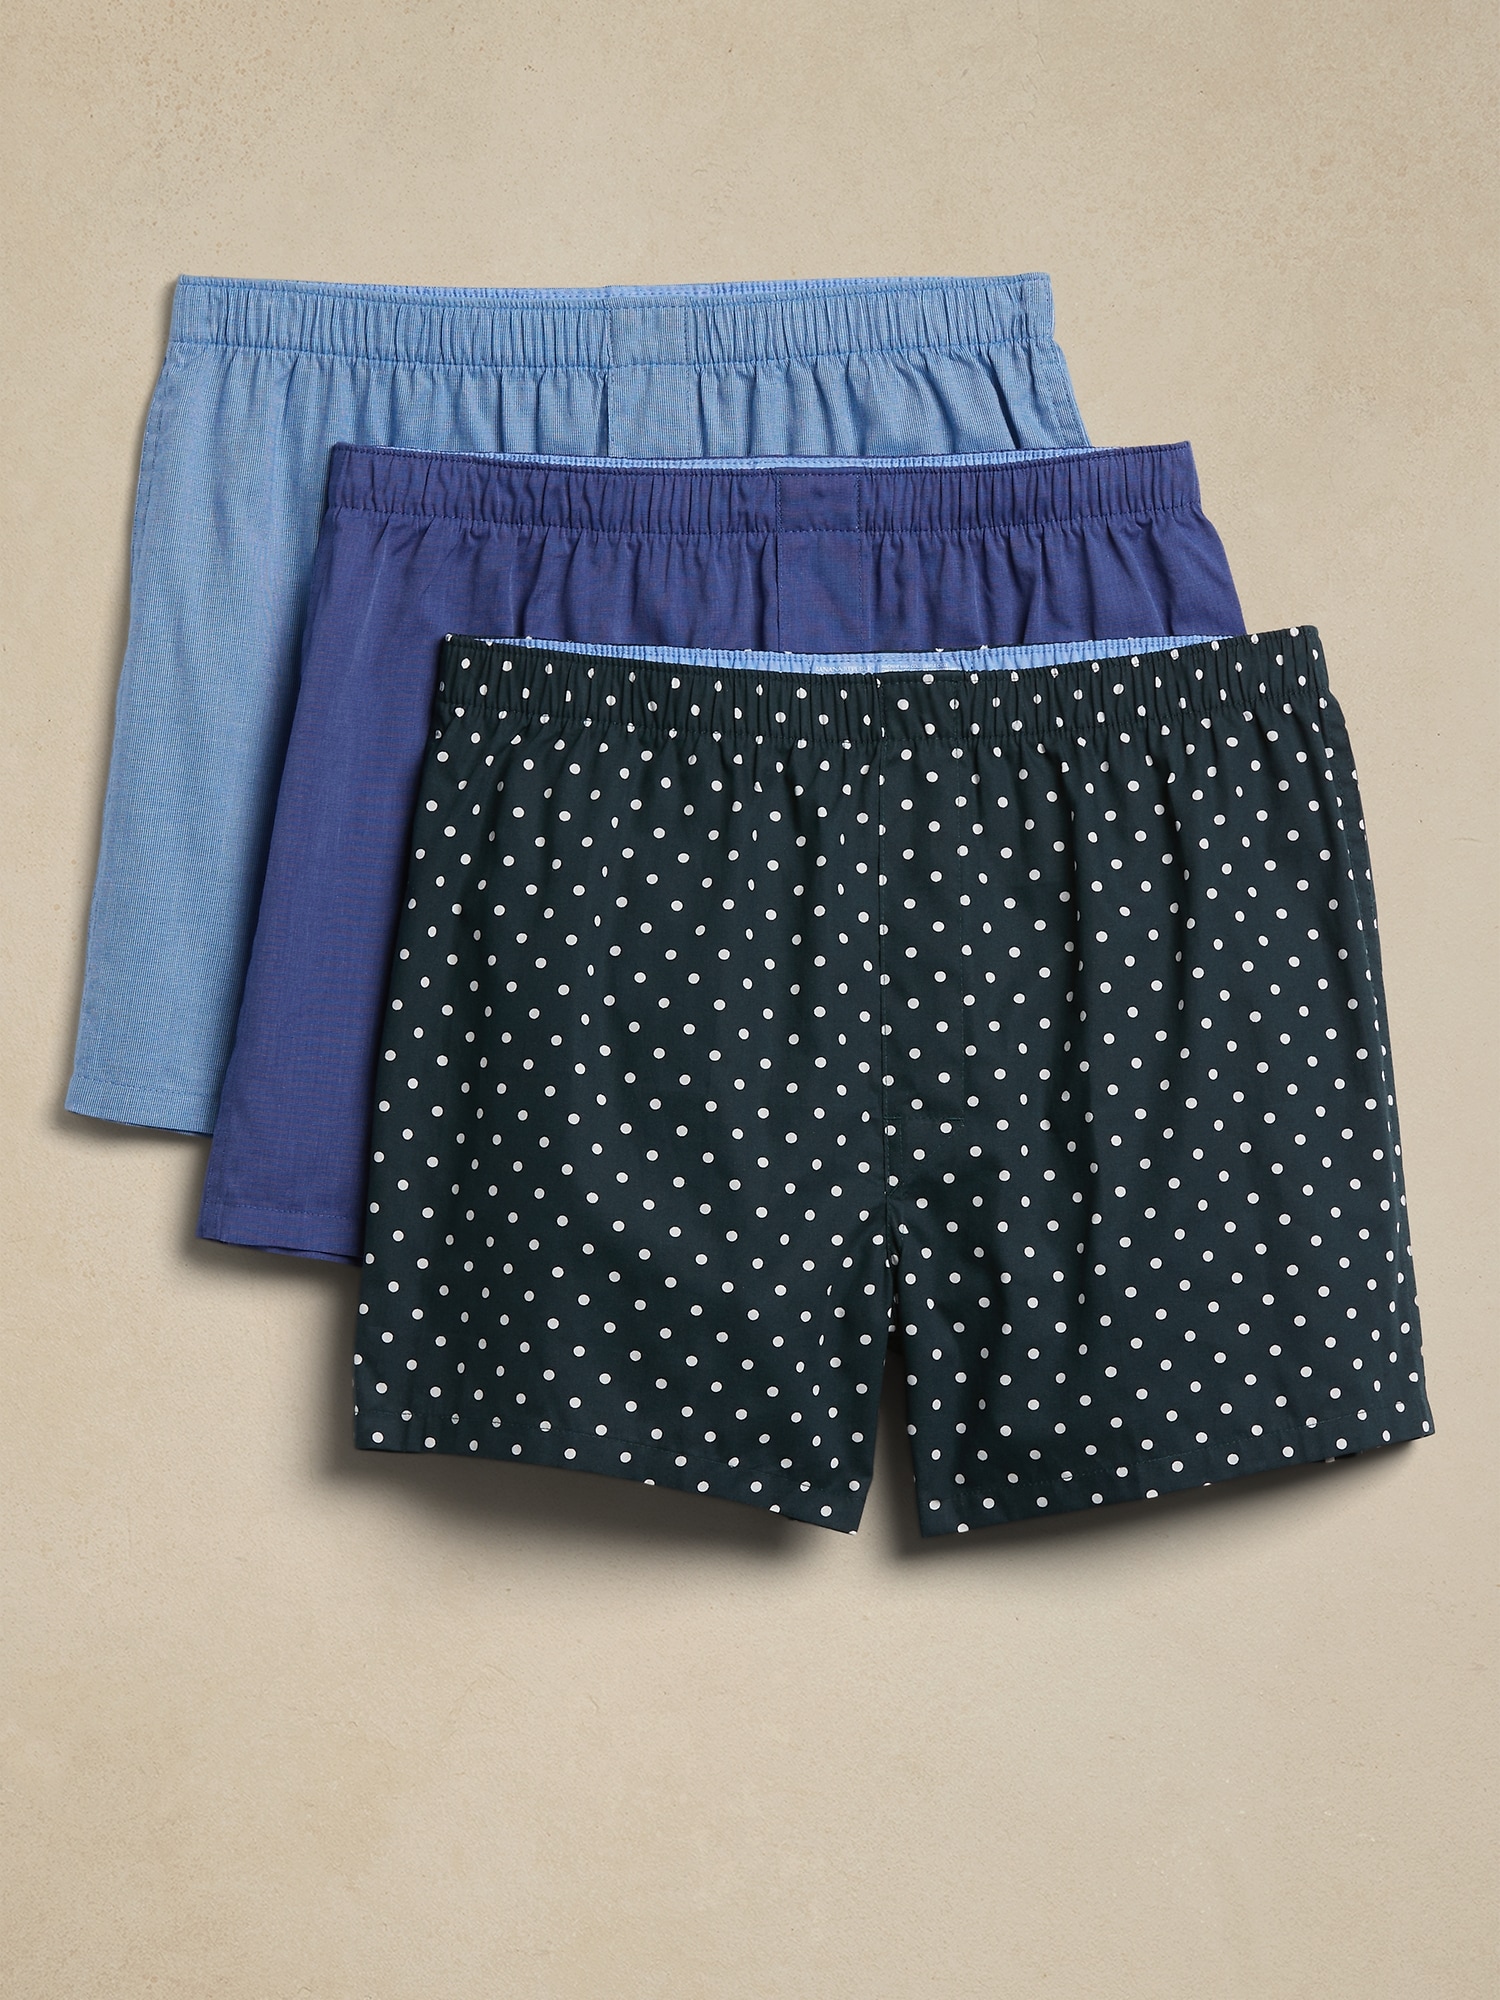 Cotton Boxers (3 pack)